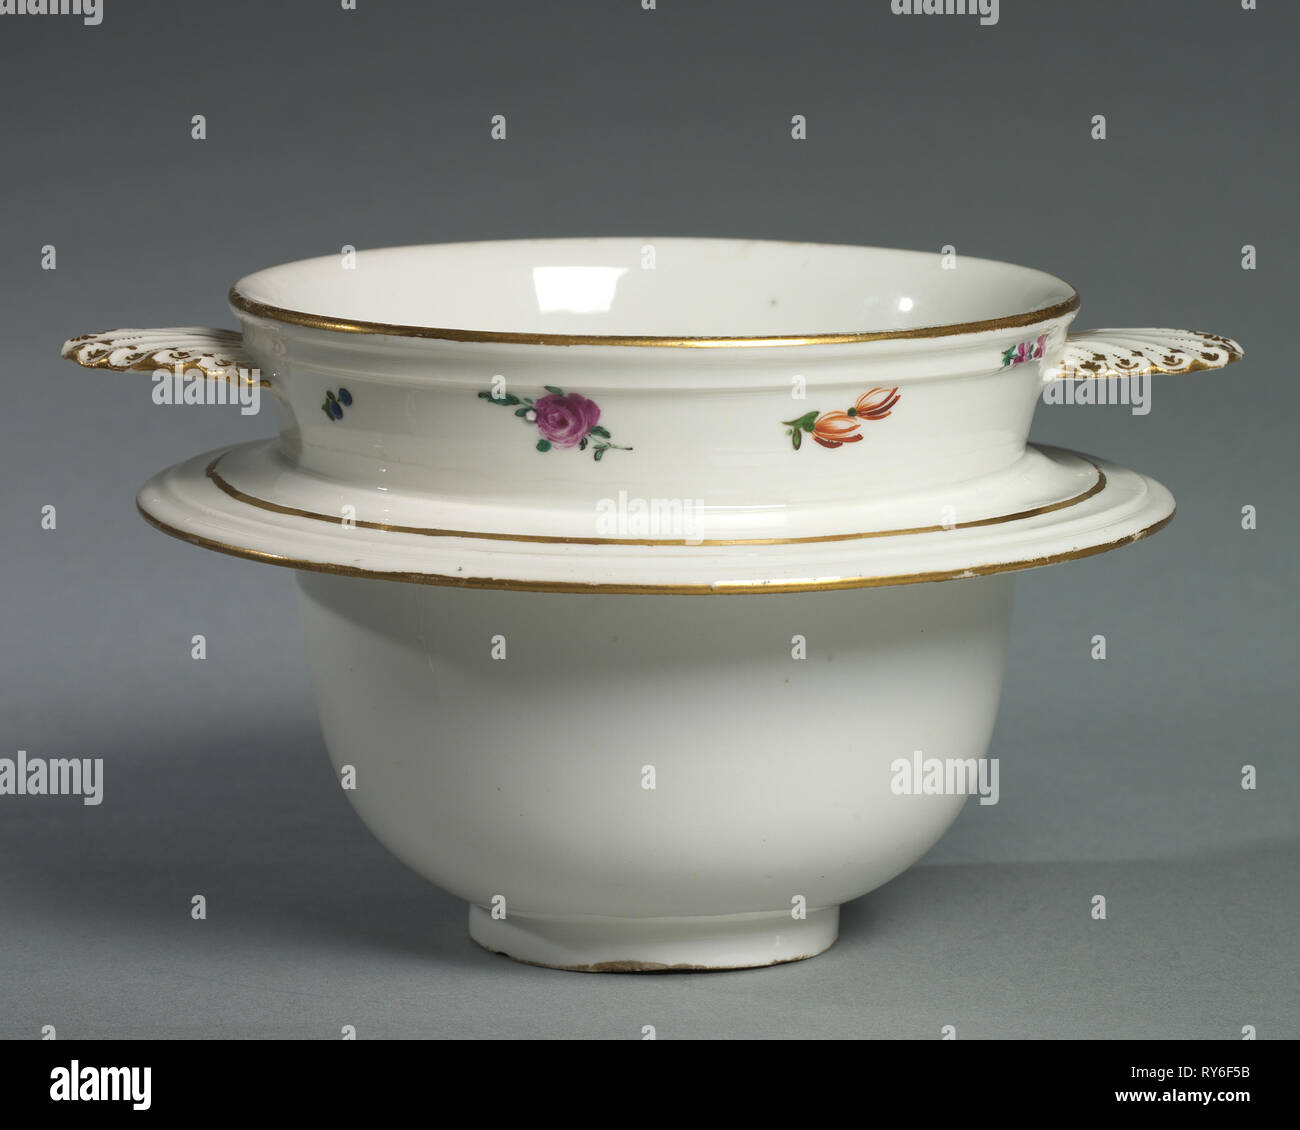 https://c8.alamy.com/comp/RY6F5B/food-warmer-veilleuse-food-container-c-1758-1760-meissen-porcelain-factory-german-probably-by-georg-christoph-lindemann-german-porcelain-overall-23-x-182-x-196-cm-9-116-x-7-316-x-7-1116-in-RY6F5B.jpg